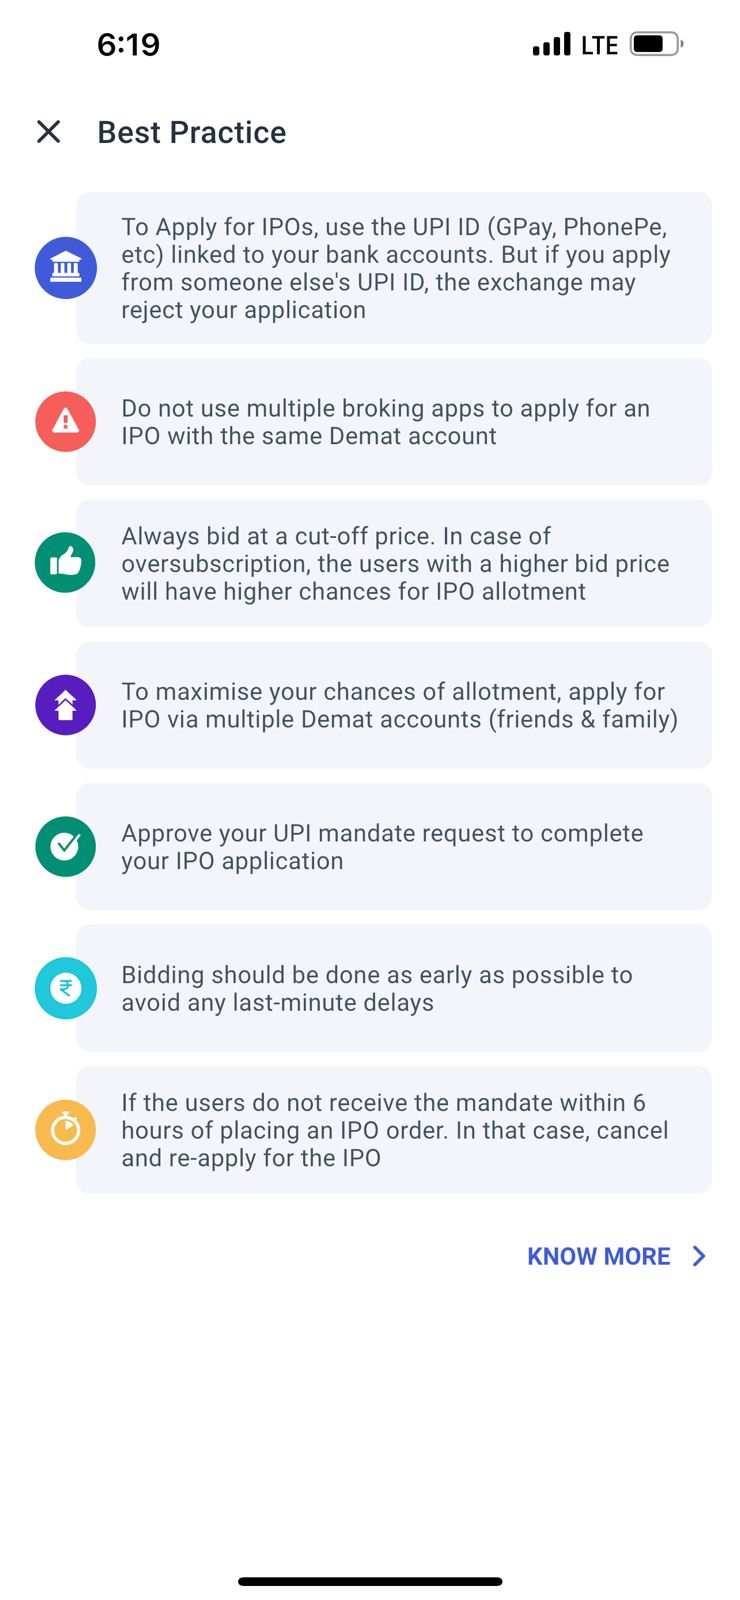 Best practices for IPO